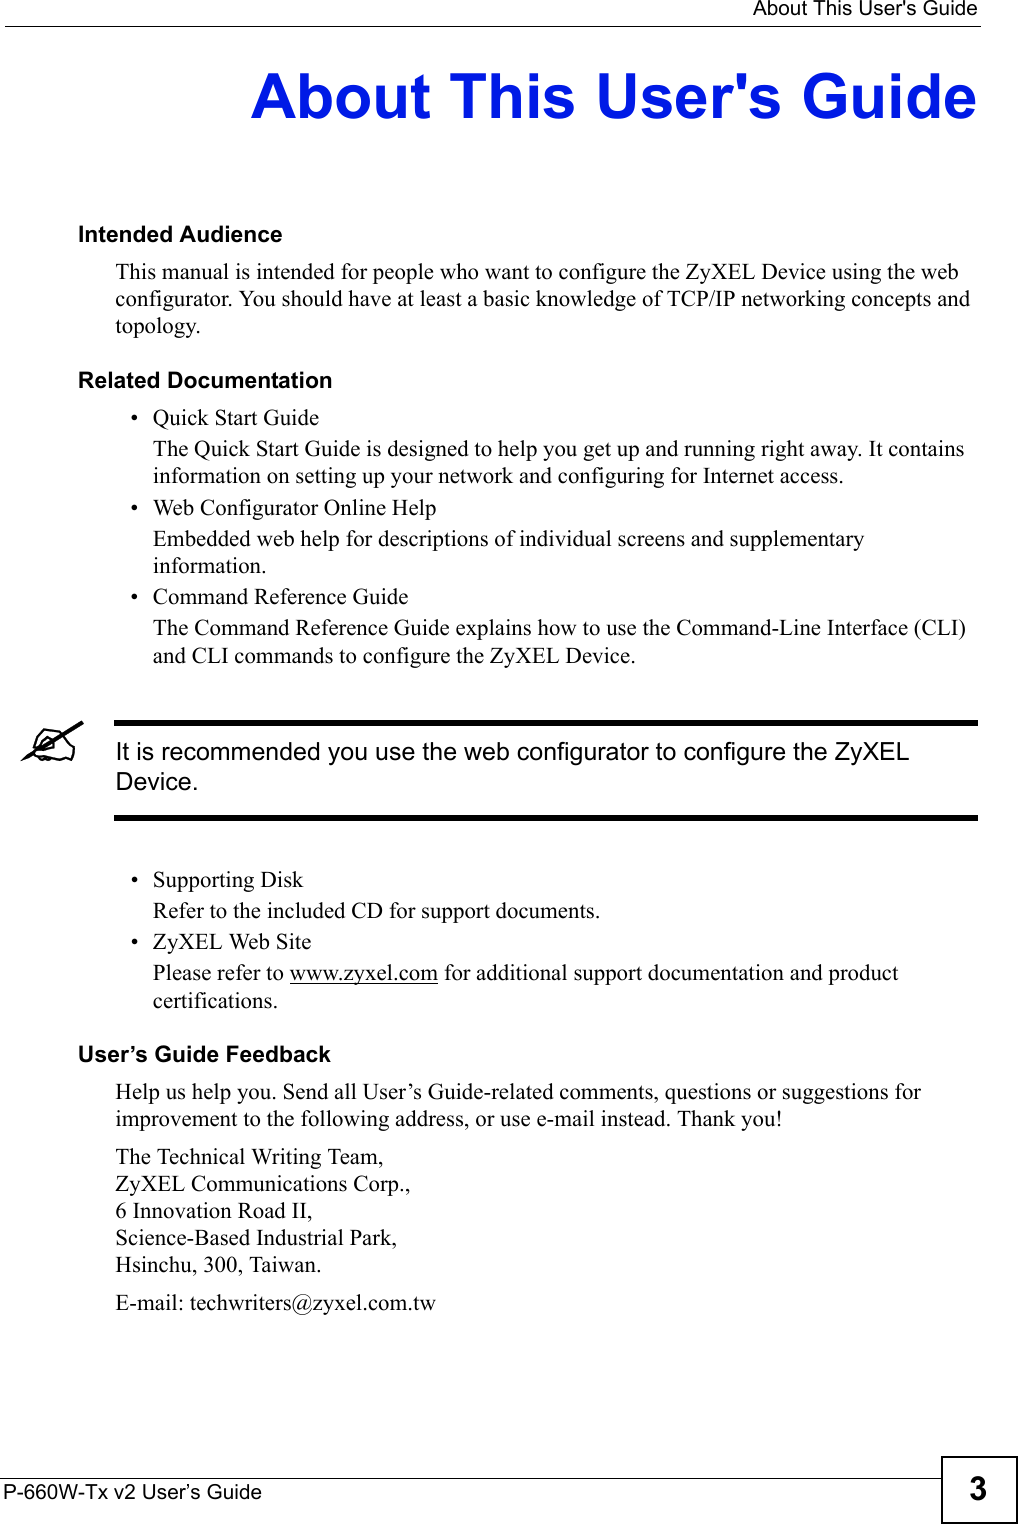   About This User&apos;s GuideP-660W-Tx v2 User’s Guide 3About This User&apos;s GuideIntended AudienceThis manual is intended for people who want to configure the ZyXEL Device using the web configurator. You should have at least a basic knowledge of TCP/IP networking concepts and topology.Related Documentation• Quick Start Guide The Quick Start Guide is designed to help you get up and running right away. It contains information on setting up your network and configuring for Internet access.• Web Configurator Online HelpEmbedded web help for descriptions of individual screens and supplementary information.• Command Reference GuideThe Command Reference Guide explains how to use the Command-Line Interface (CLI) and CLI commands to configure the ZyXEL Device.&quot;It is recommended you use the web configurator to configure the ZyXEL Device.• Supporting DiskRefer to the included CD for support documents.• ZyXEL Web SitePlease refer to www.zyxel.com for additional support documentation and product certifications.User’s Guide FeedbackHelp us help you. Send all User’s Guide-related comments, questions or suggestions for improvement to the following address, or use e-mail instead. Thank you!The Technical Writing Team,ZyXEL Communications Corp.,6 Innovation Road II,Science-Based Industrial Park, Hsinchu, 300, Taiwan.E-mail: techwriters@zyxel.com.tw